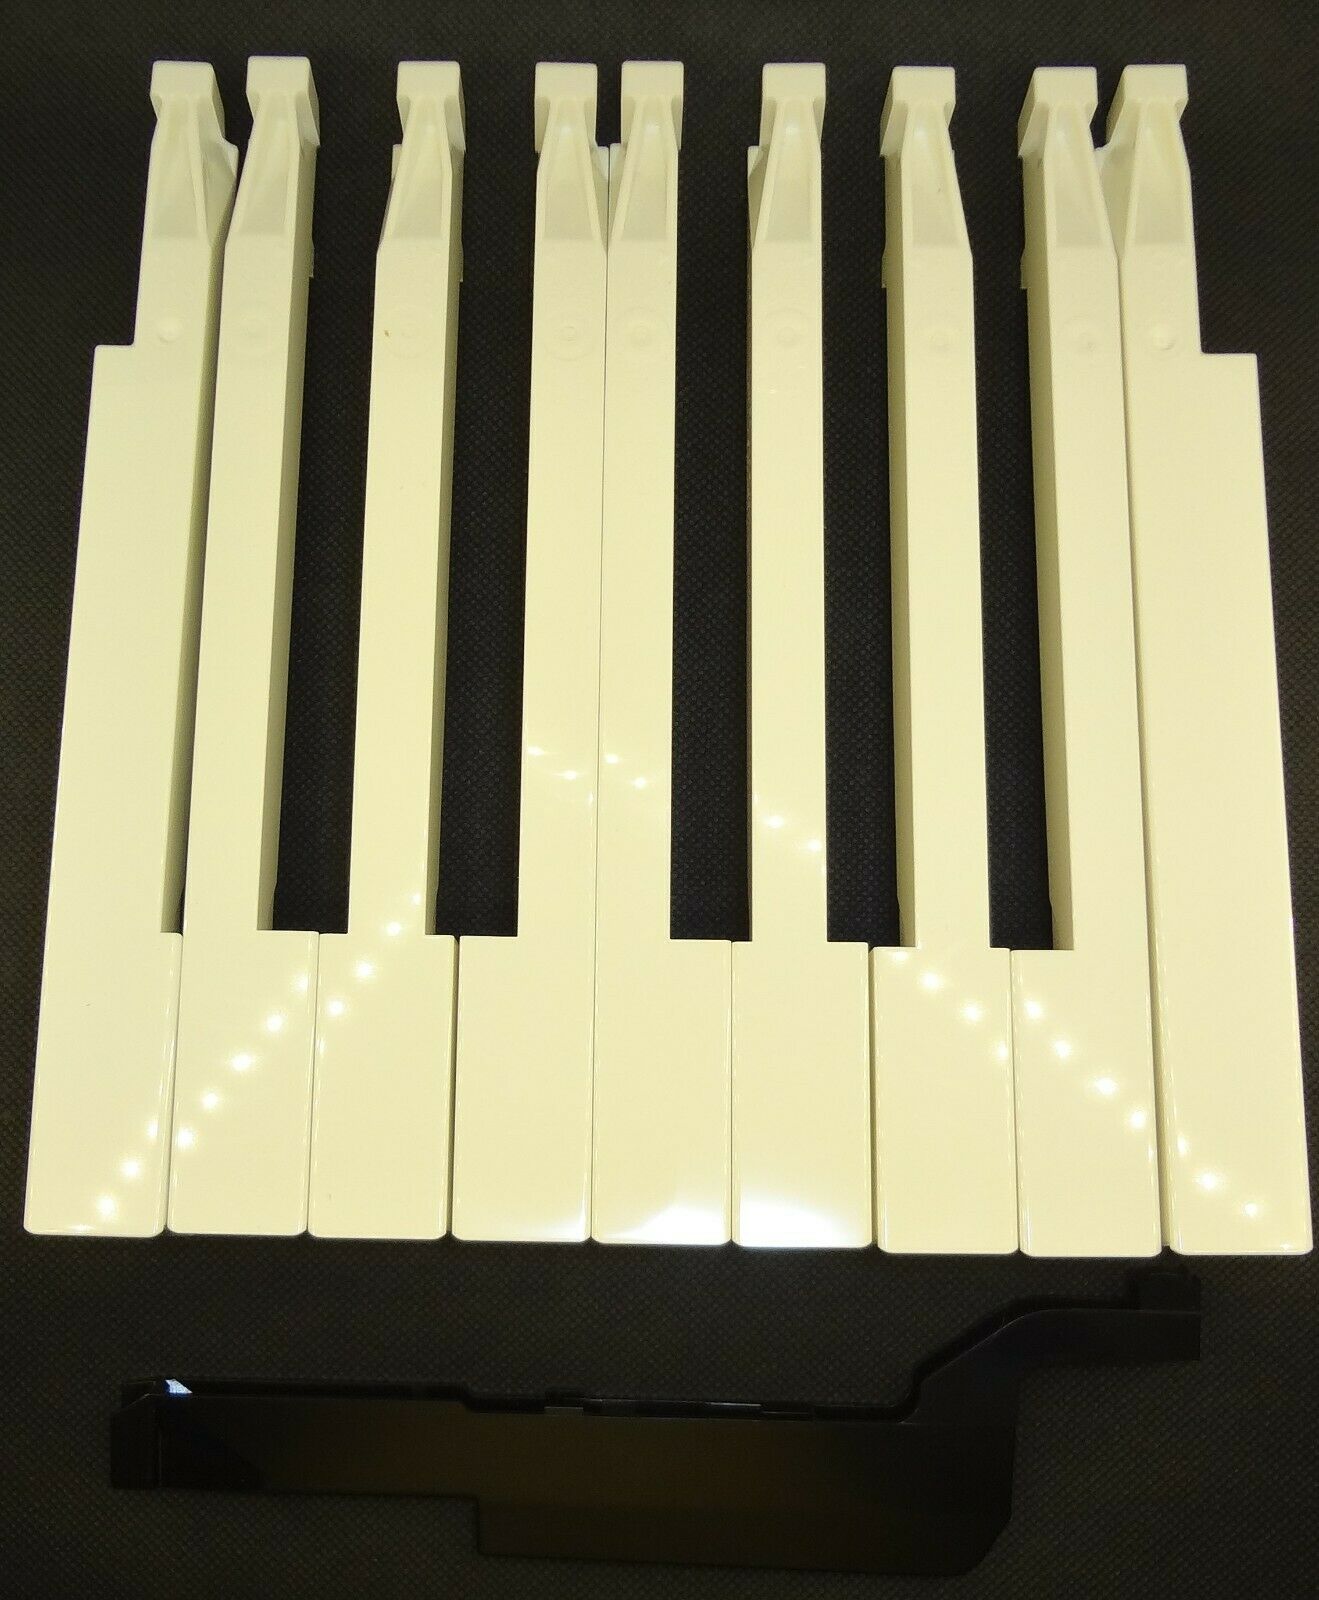 New Replacement Piano Key For Yamaha Clp Cvp, P, Motif, Gh3 Ghd Ghs